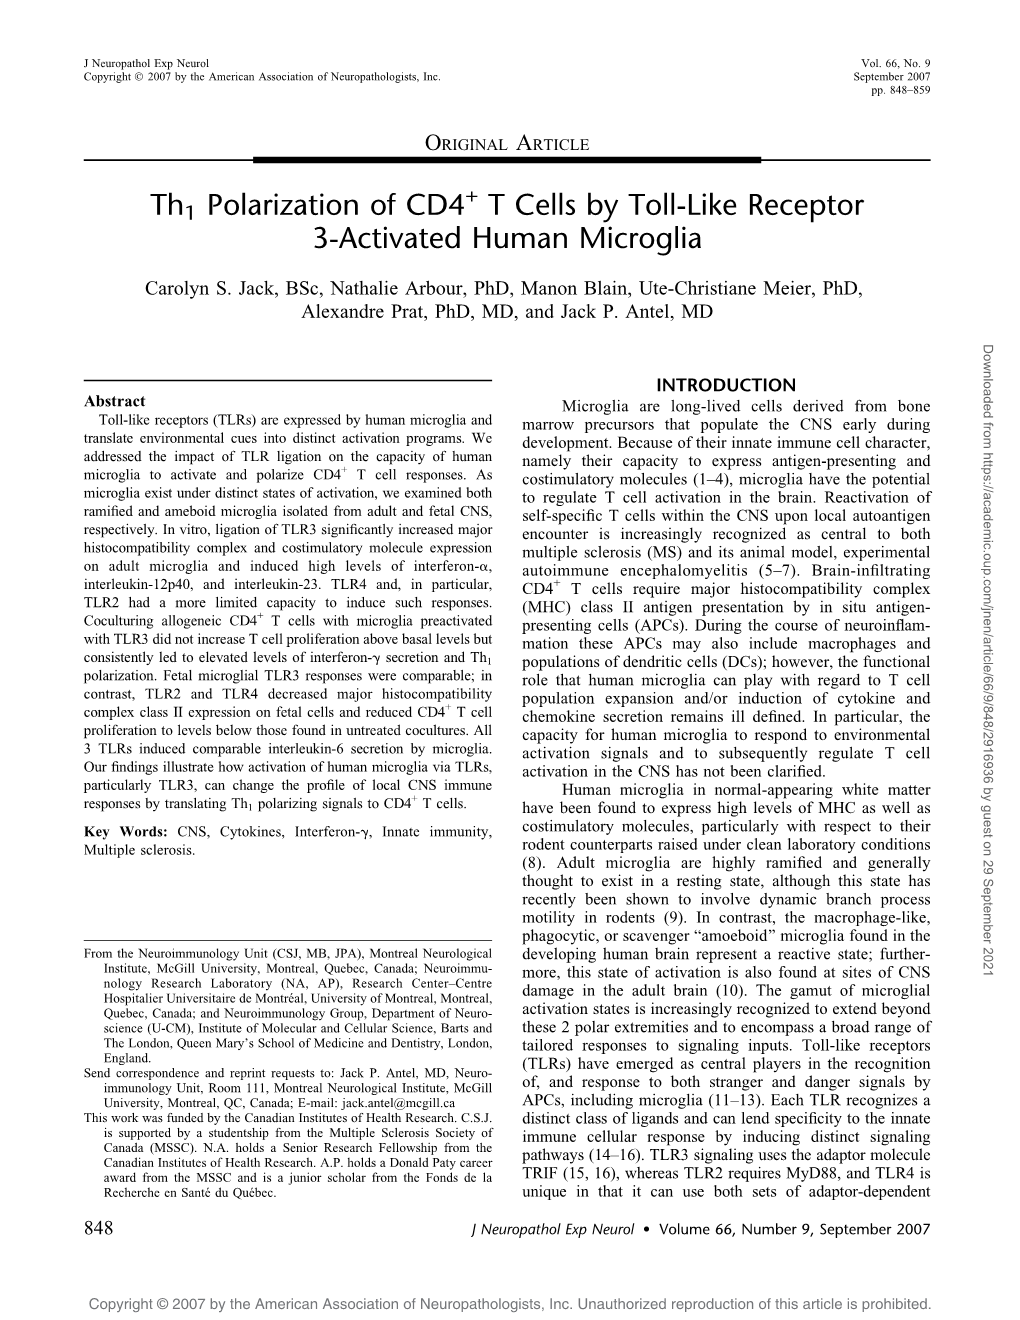 Th1 Polarization of CD4 T Cells by Toll-Like Receptor 3-Activated Human Microglia